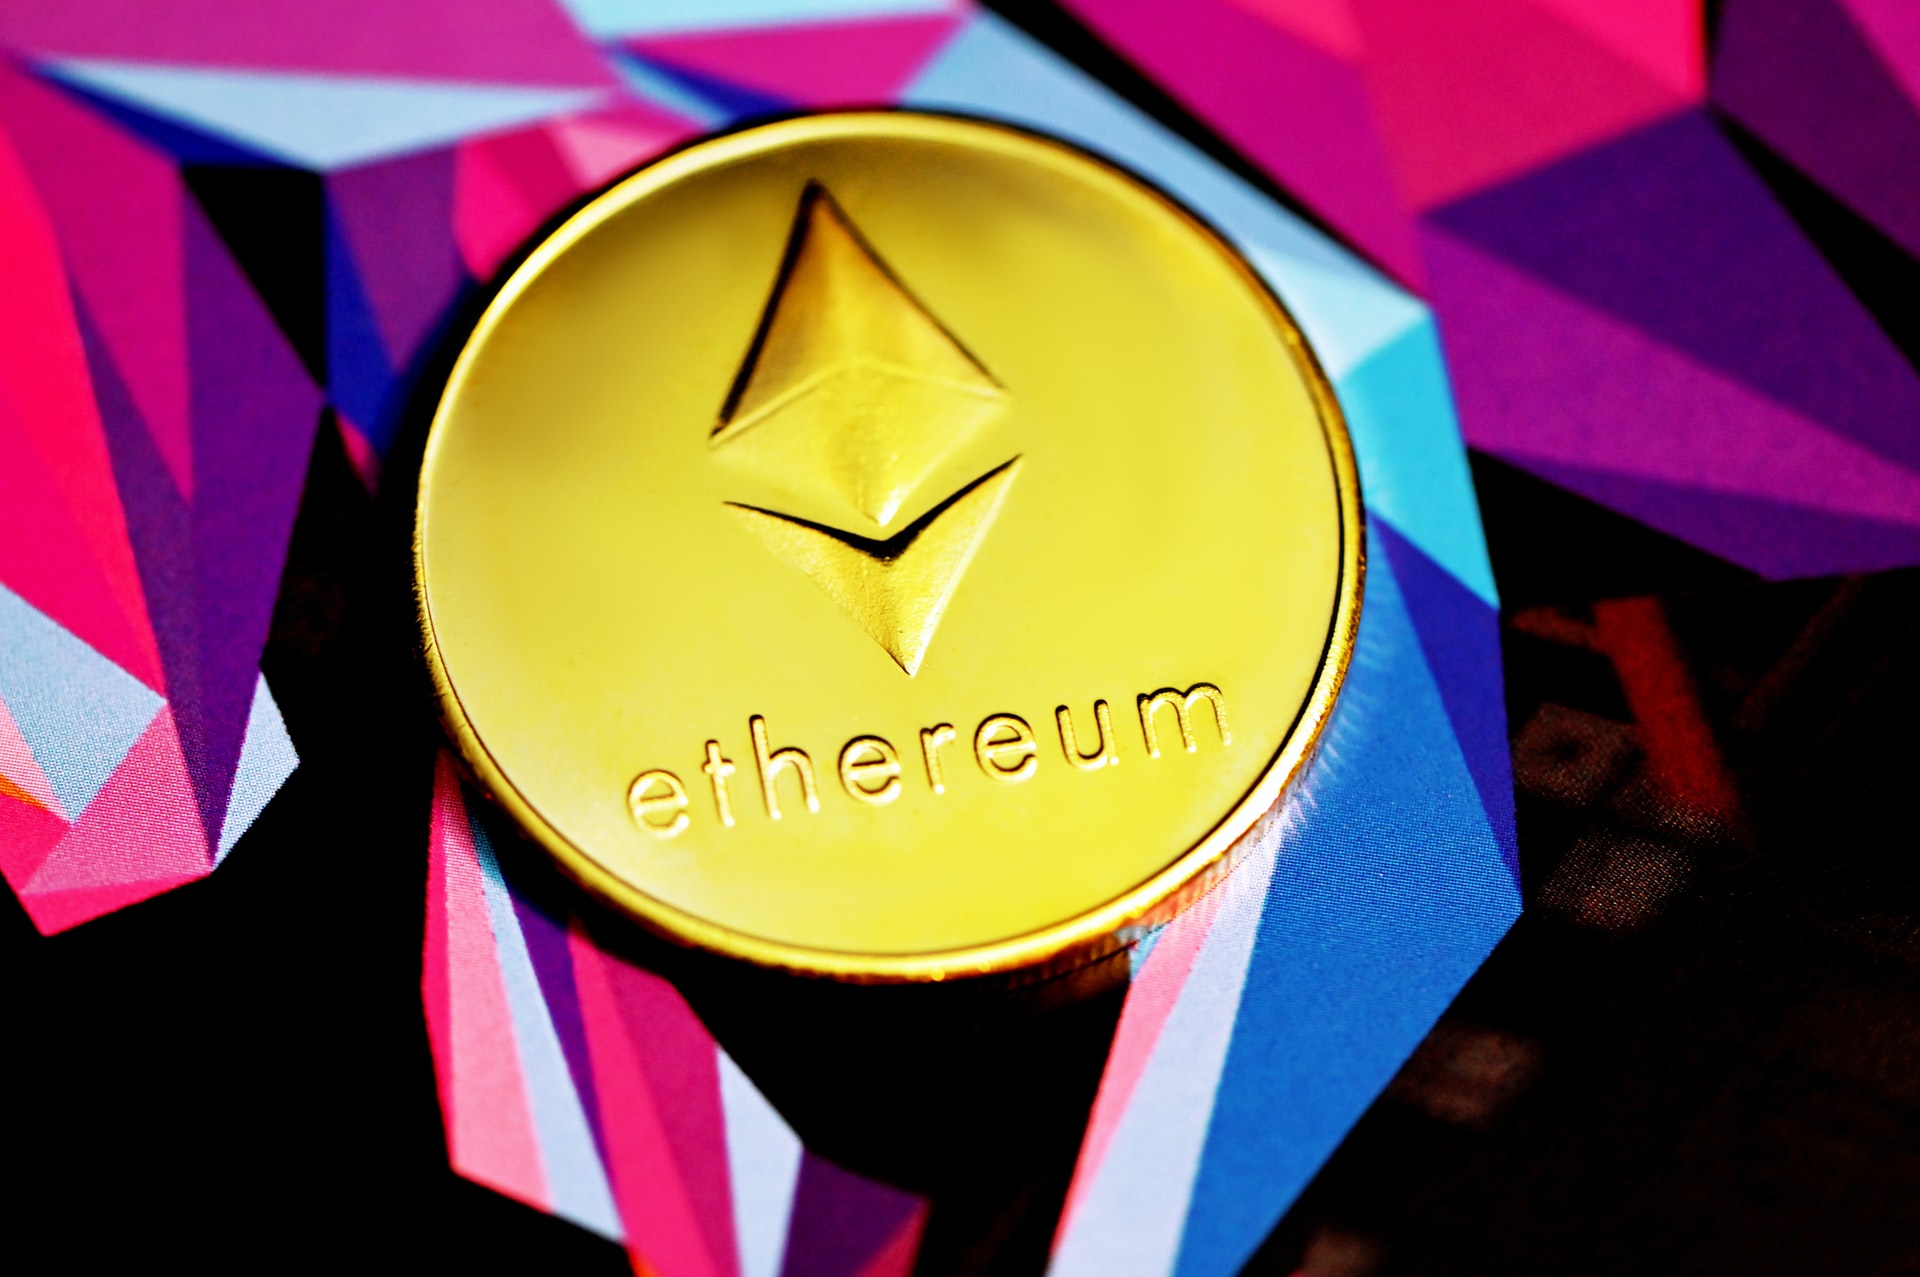 Ethereum Demand for DeFi, Staking Expands as Exchange Supply Continues Shrinking